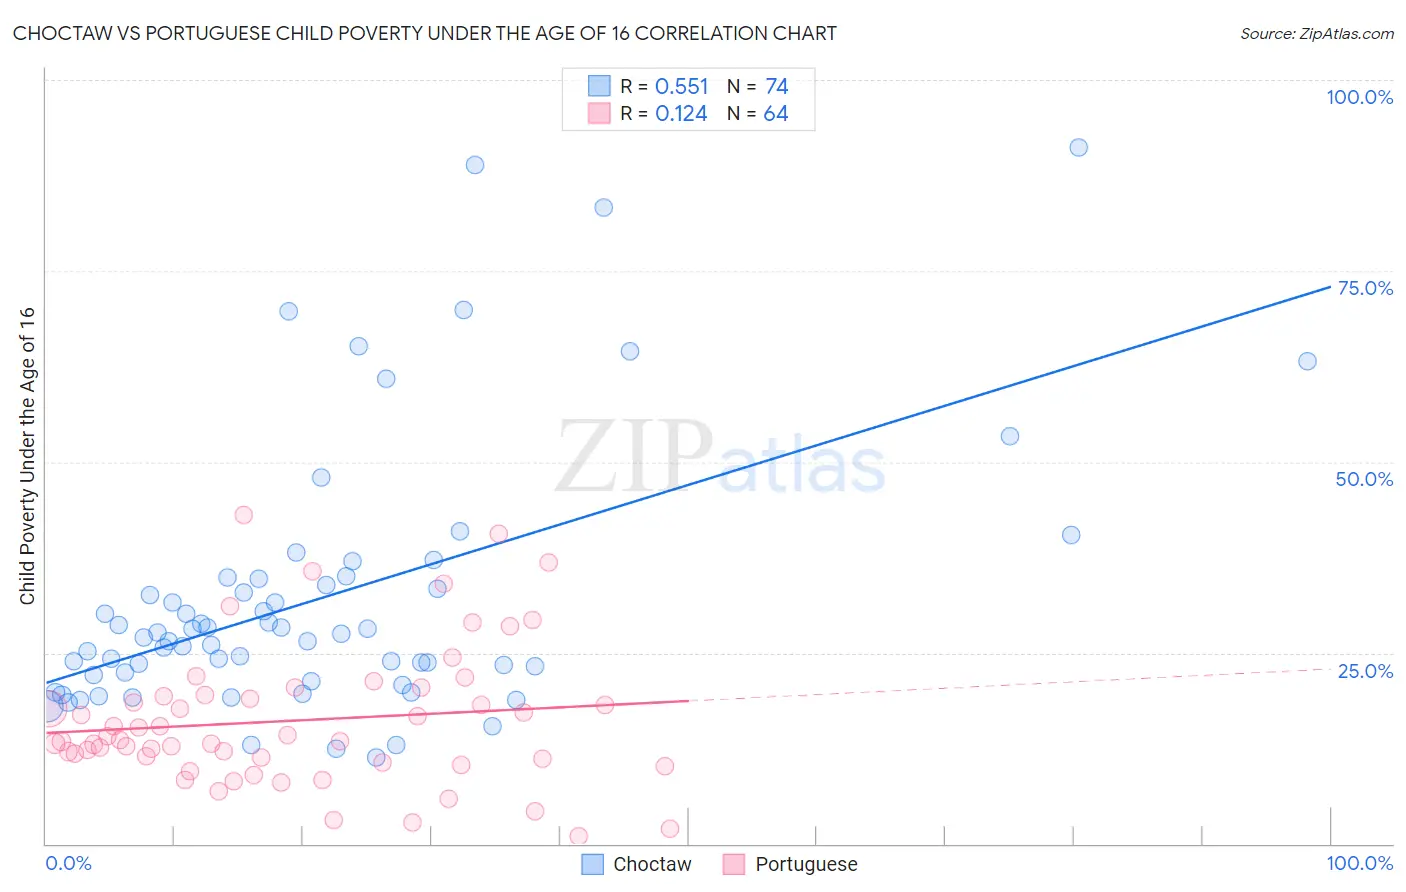 Choctaw vs Portuguese Child Poverty Under the Age of 16